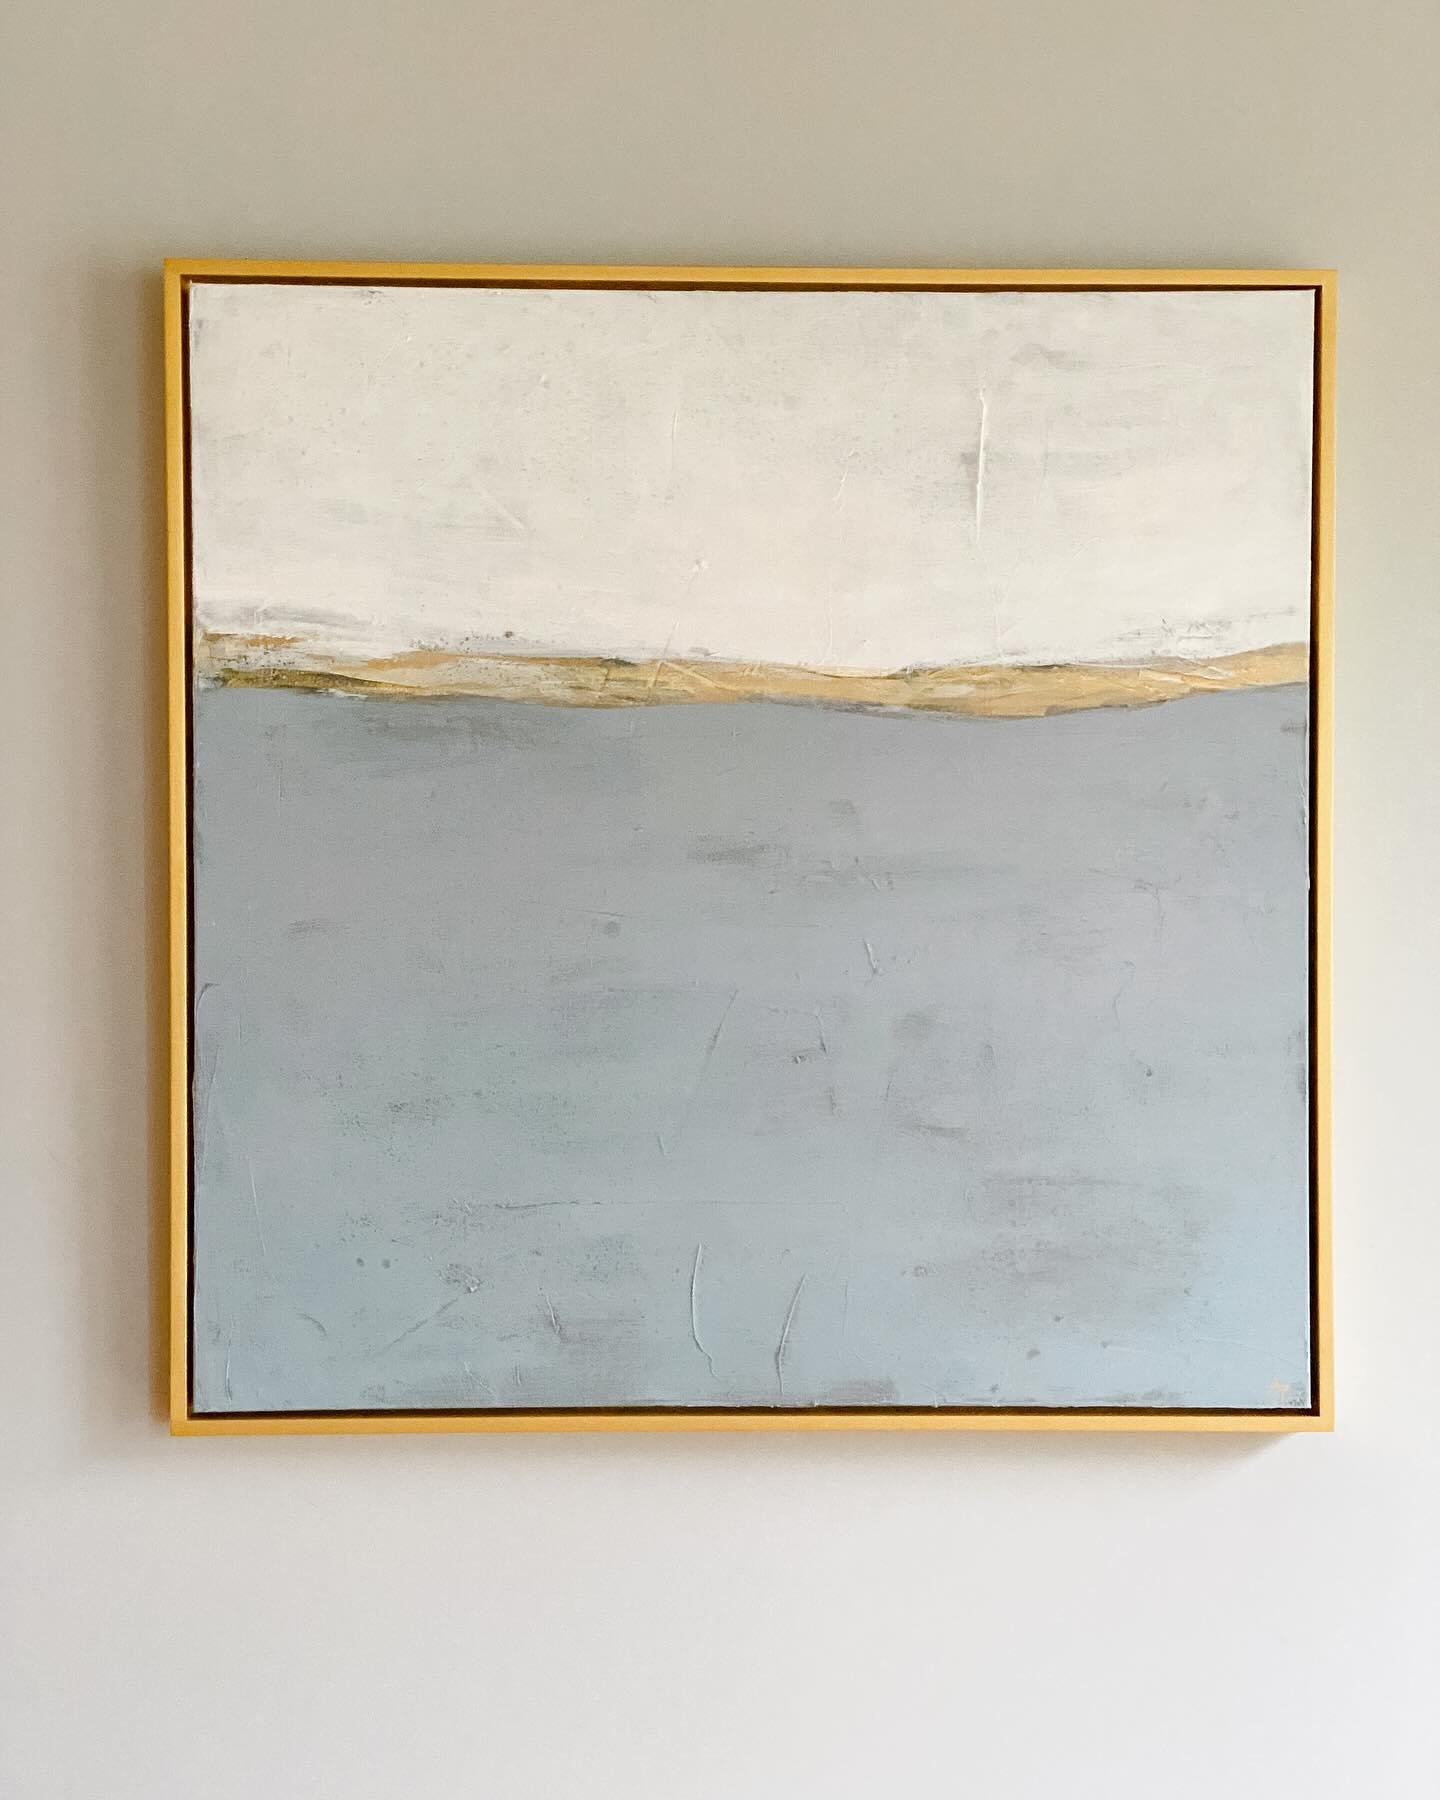 When it&rsquo;s hip to be square and not sad to be blue.

✨The best gold frame surrounds this 36&rdquo;x36&rdquo; blue abstract landscape.

Available at the beautiful @thefrenchmix 

Please DM us for more details and happy Friday!

#southernartist #a